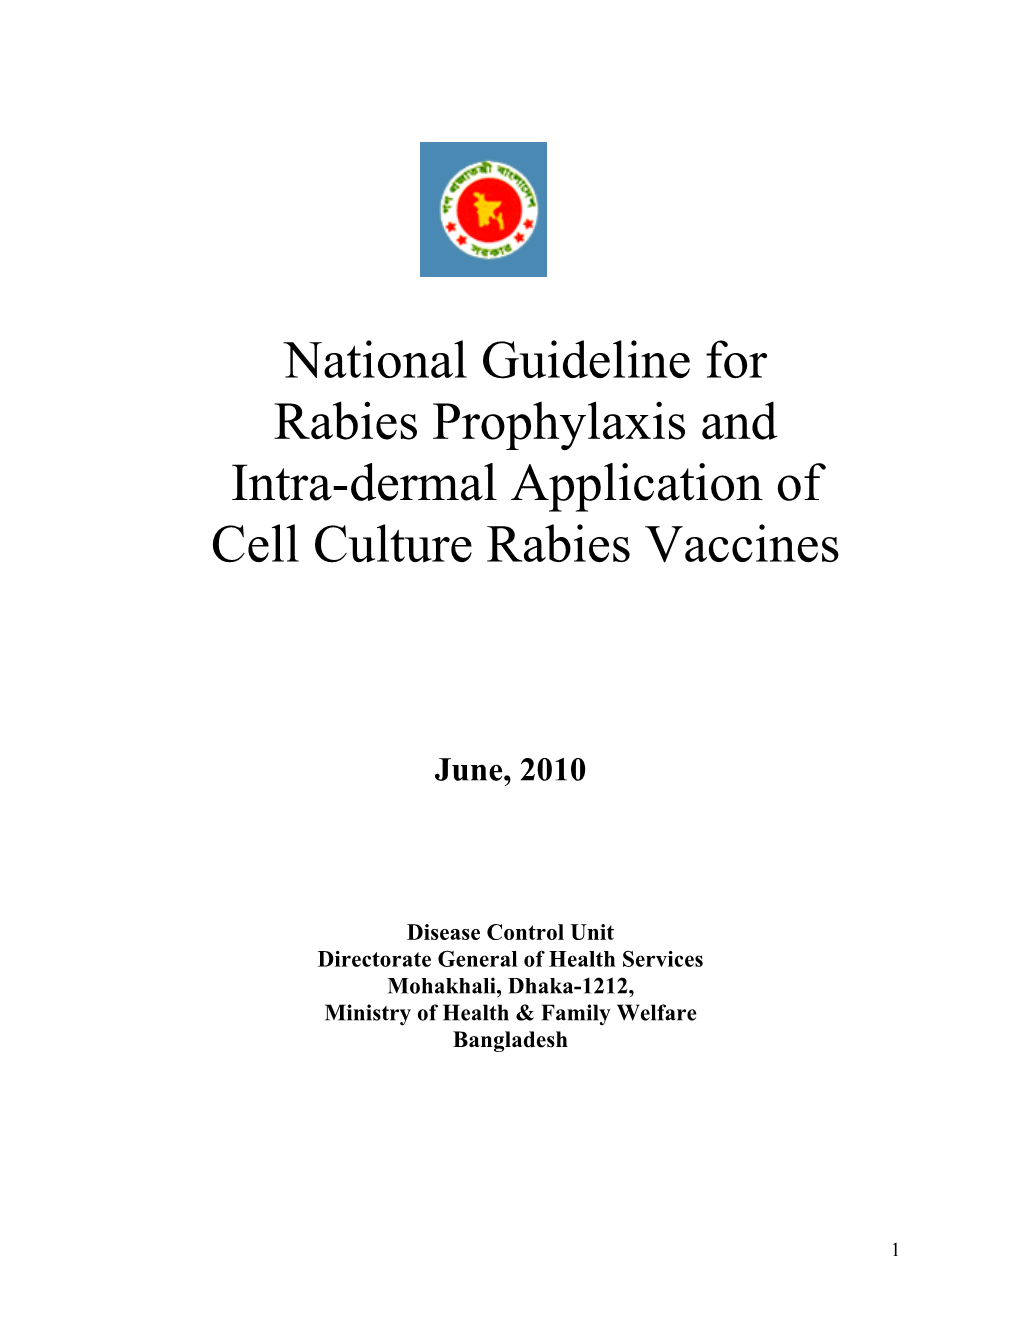 National Guideline for Rabies Prophylaxis and Intra-Dermal Application of Cell Culture Rabies Vaccines